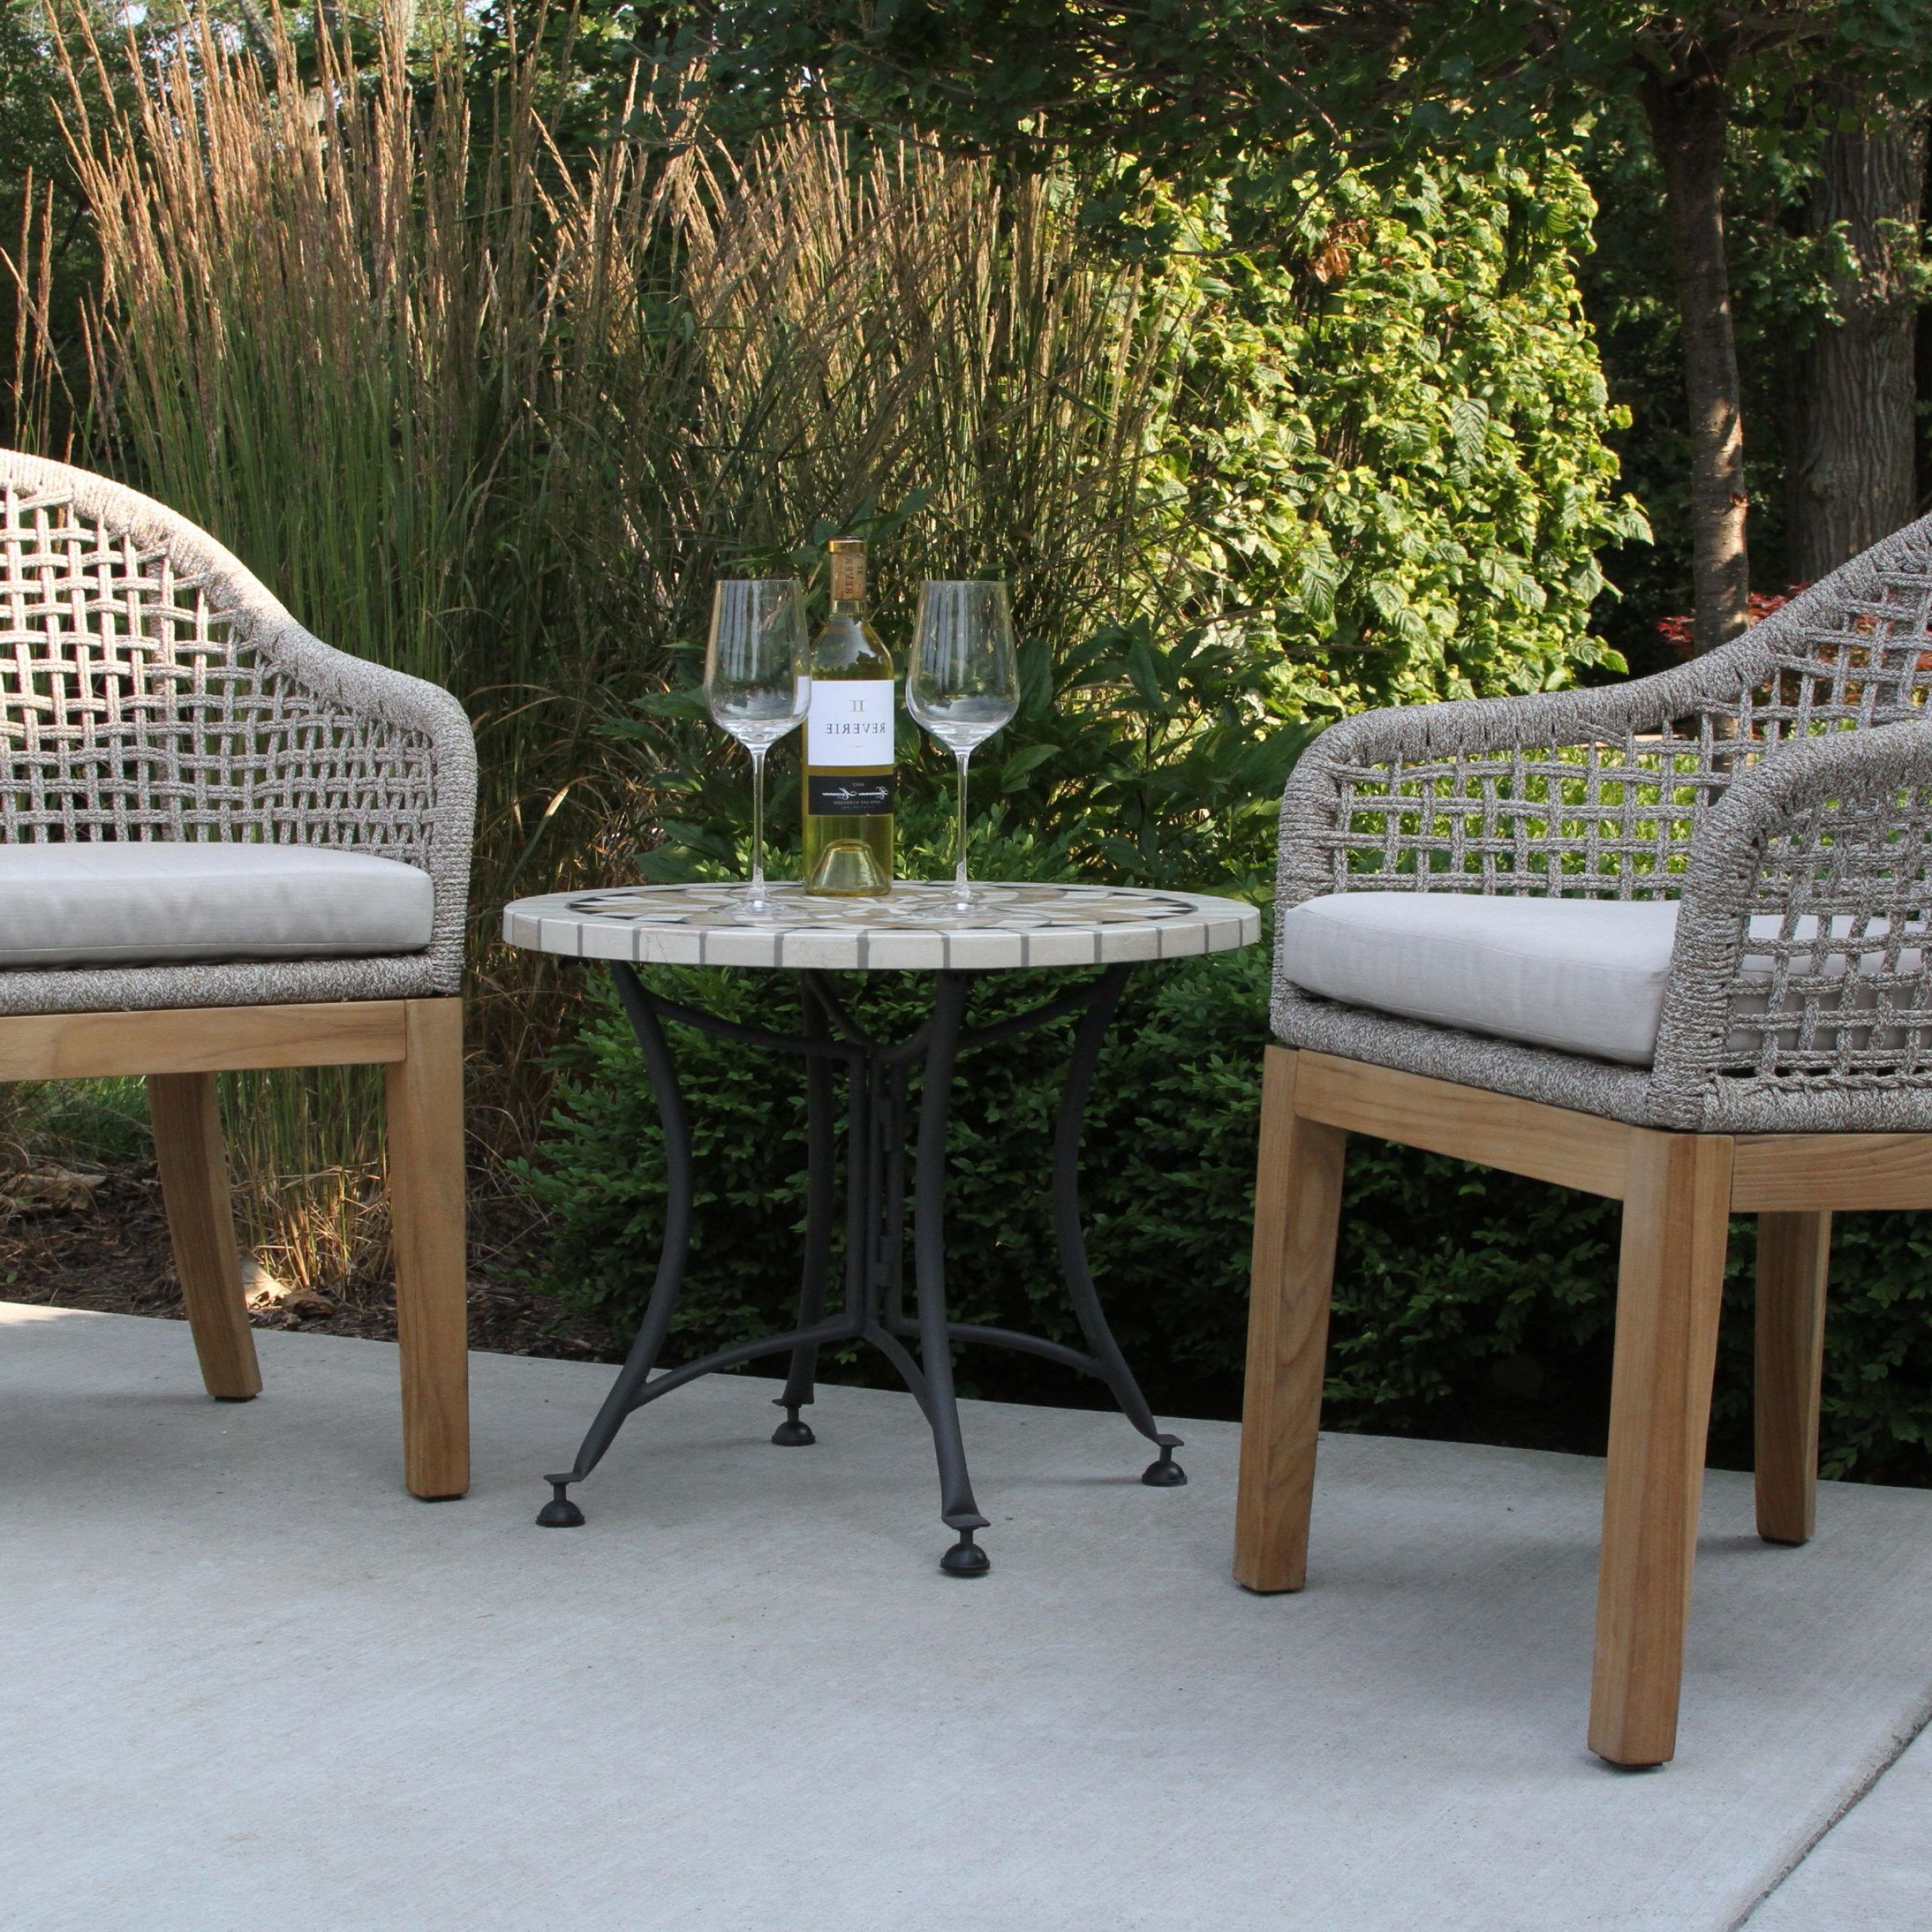 Teak With Regard To Natural Woven Coastal Modern Outdoor Chairs Sets (View 2 of 15)